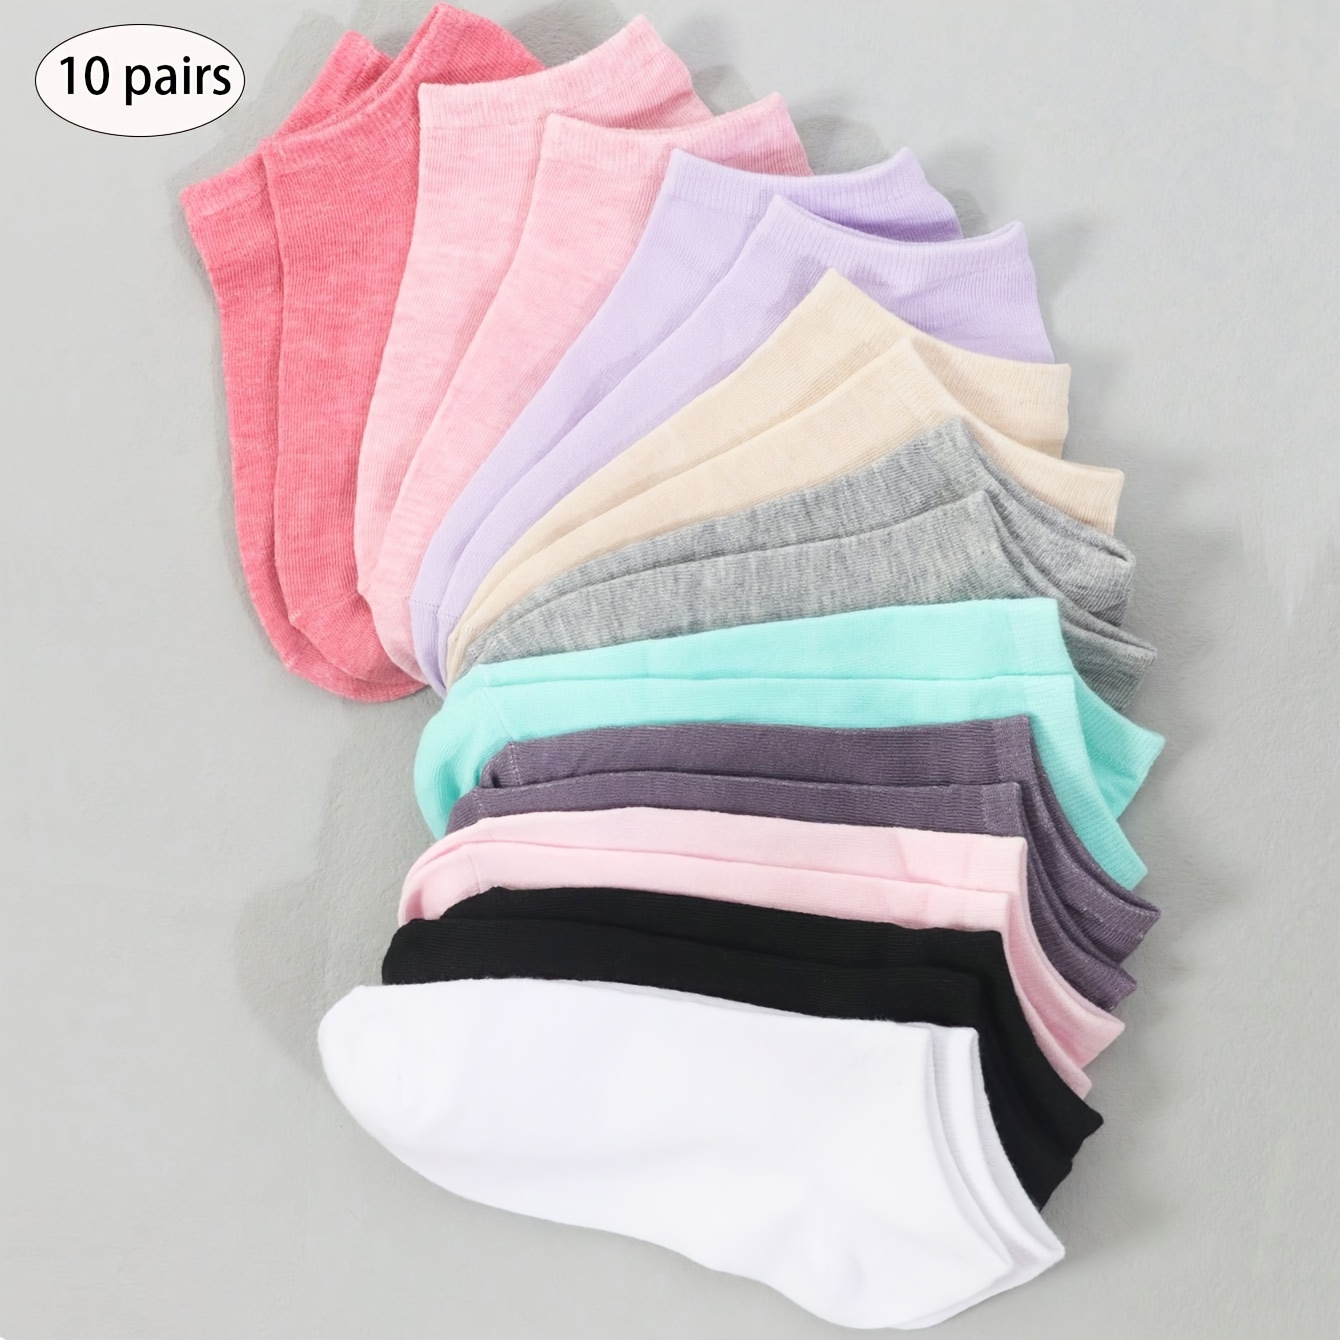 

10 Pairs Casual Solid Socks, Soft & Breathable No Show Ankle Socks, Women's Stockings & Hosiery